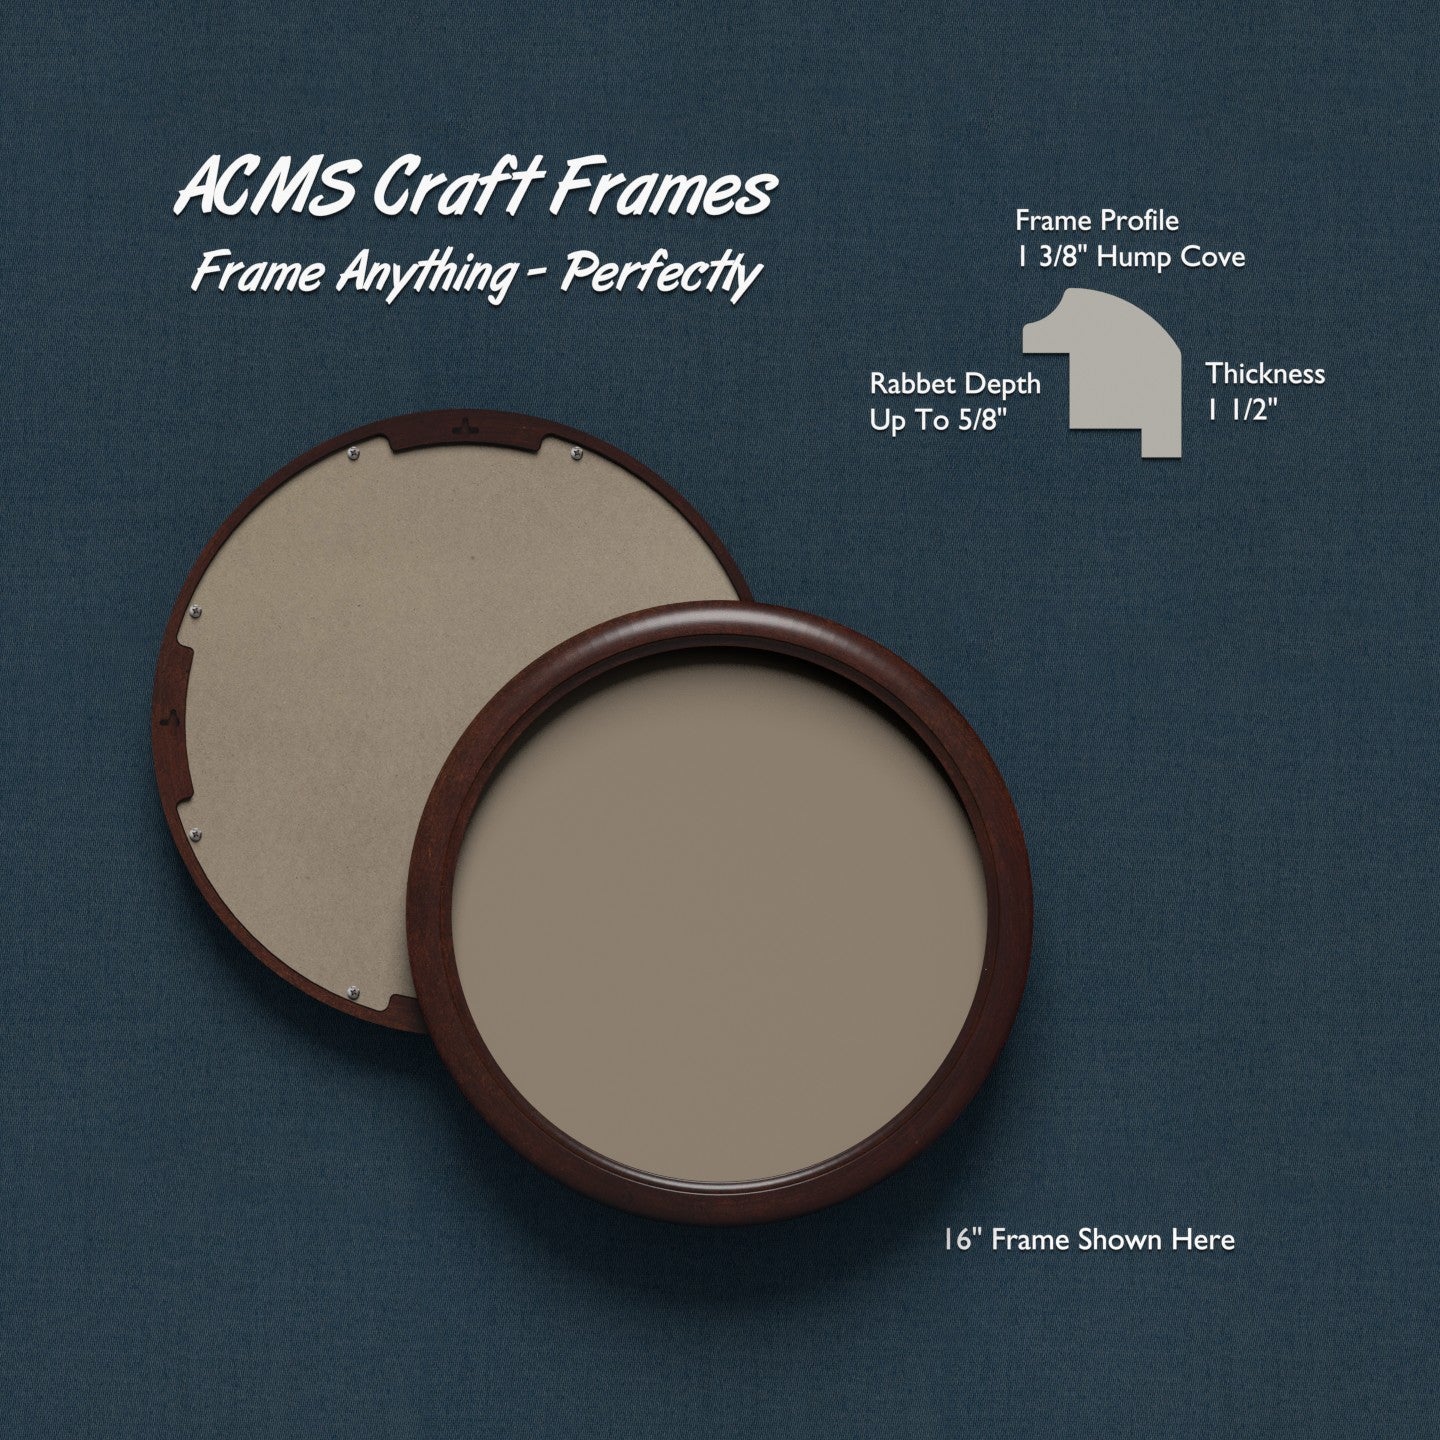 Round Craft Frame - 1 1/2" Thick - 1 3/8" Hump Cove Profile